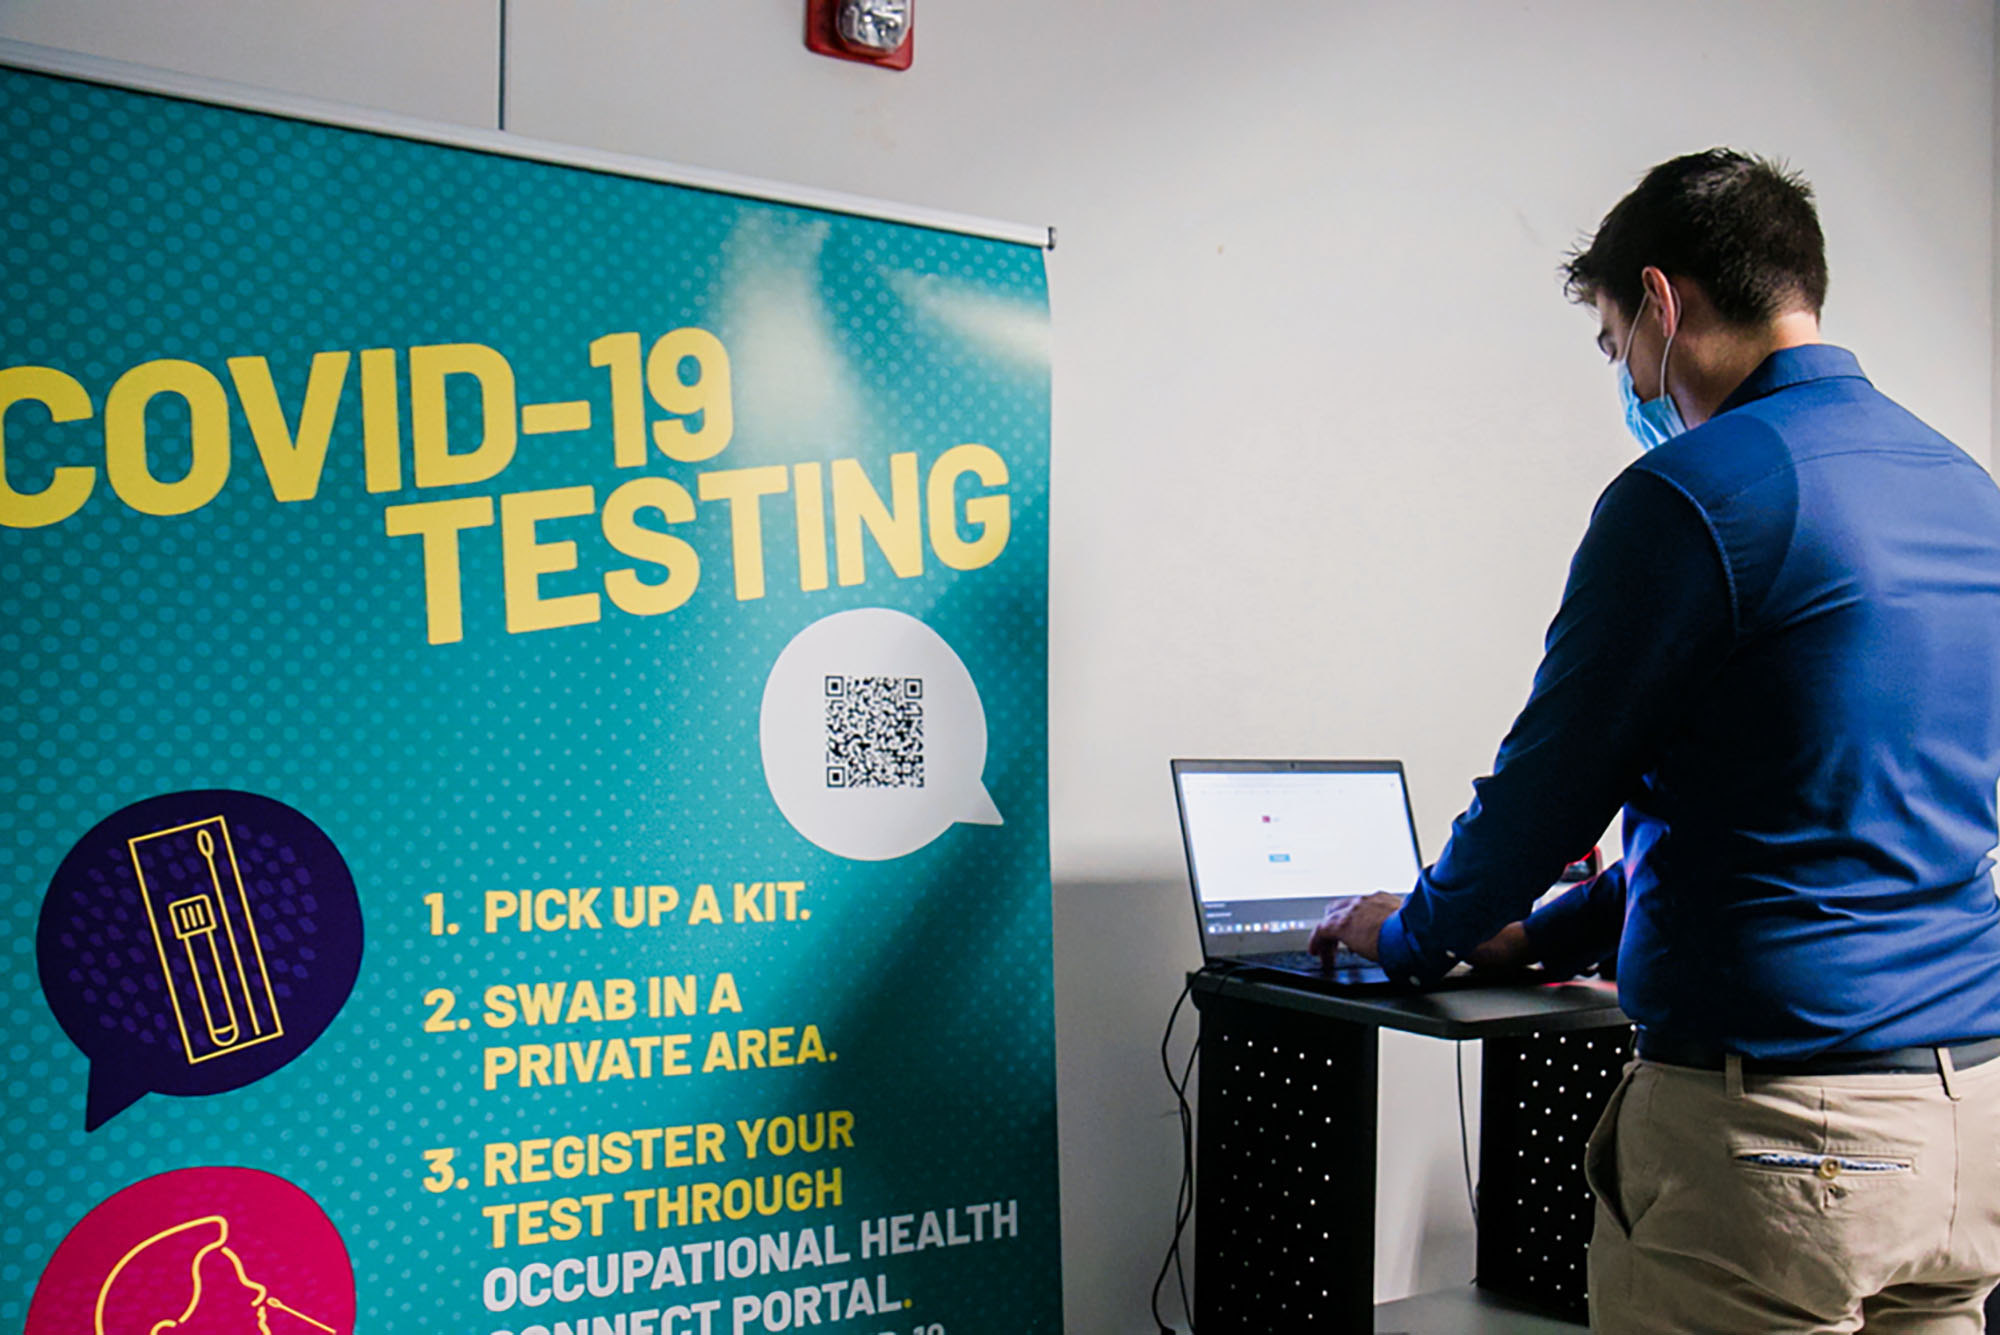 An individual working on a laptop stands with their back to the camera. A sign next to them reads "COVID-19 Testing" in yellow letters on a blue background